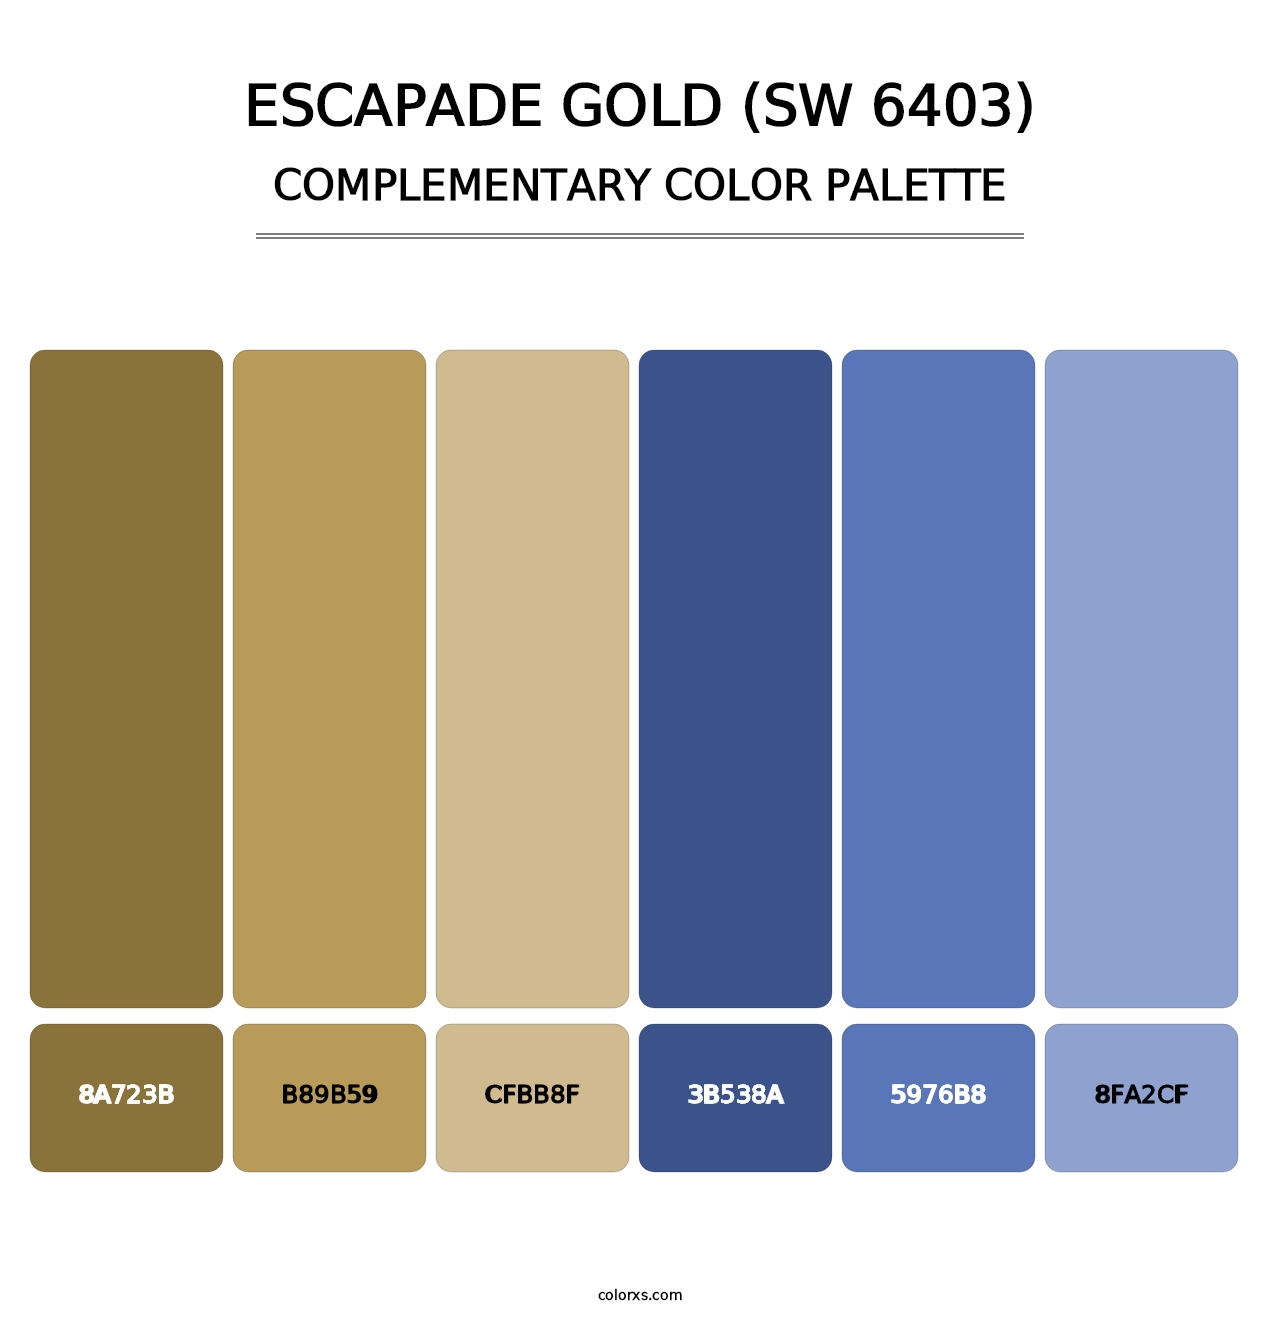 Escapade Gold (SW 6403) - Complementary Color Palette